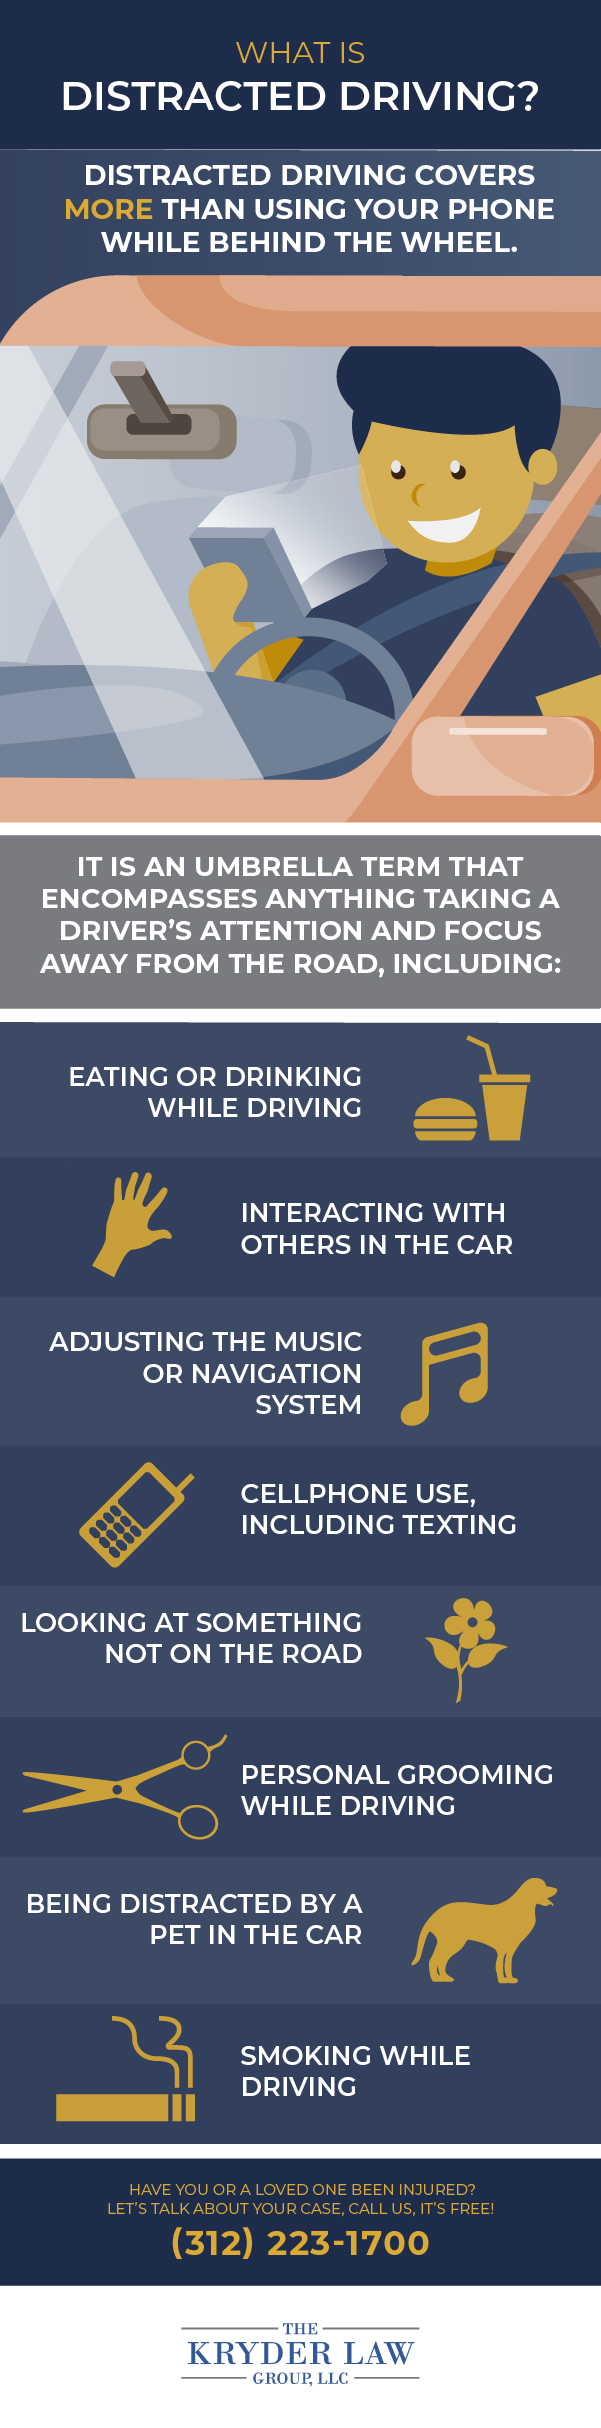 Aurora Distracted Driving Accident Lawyer Infographic